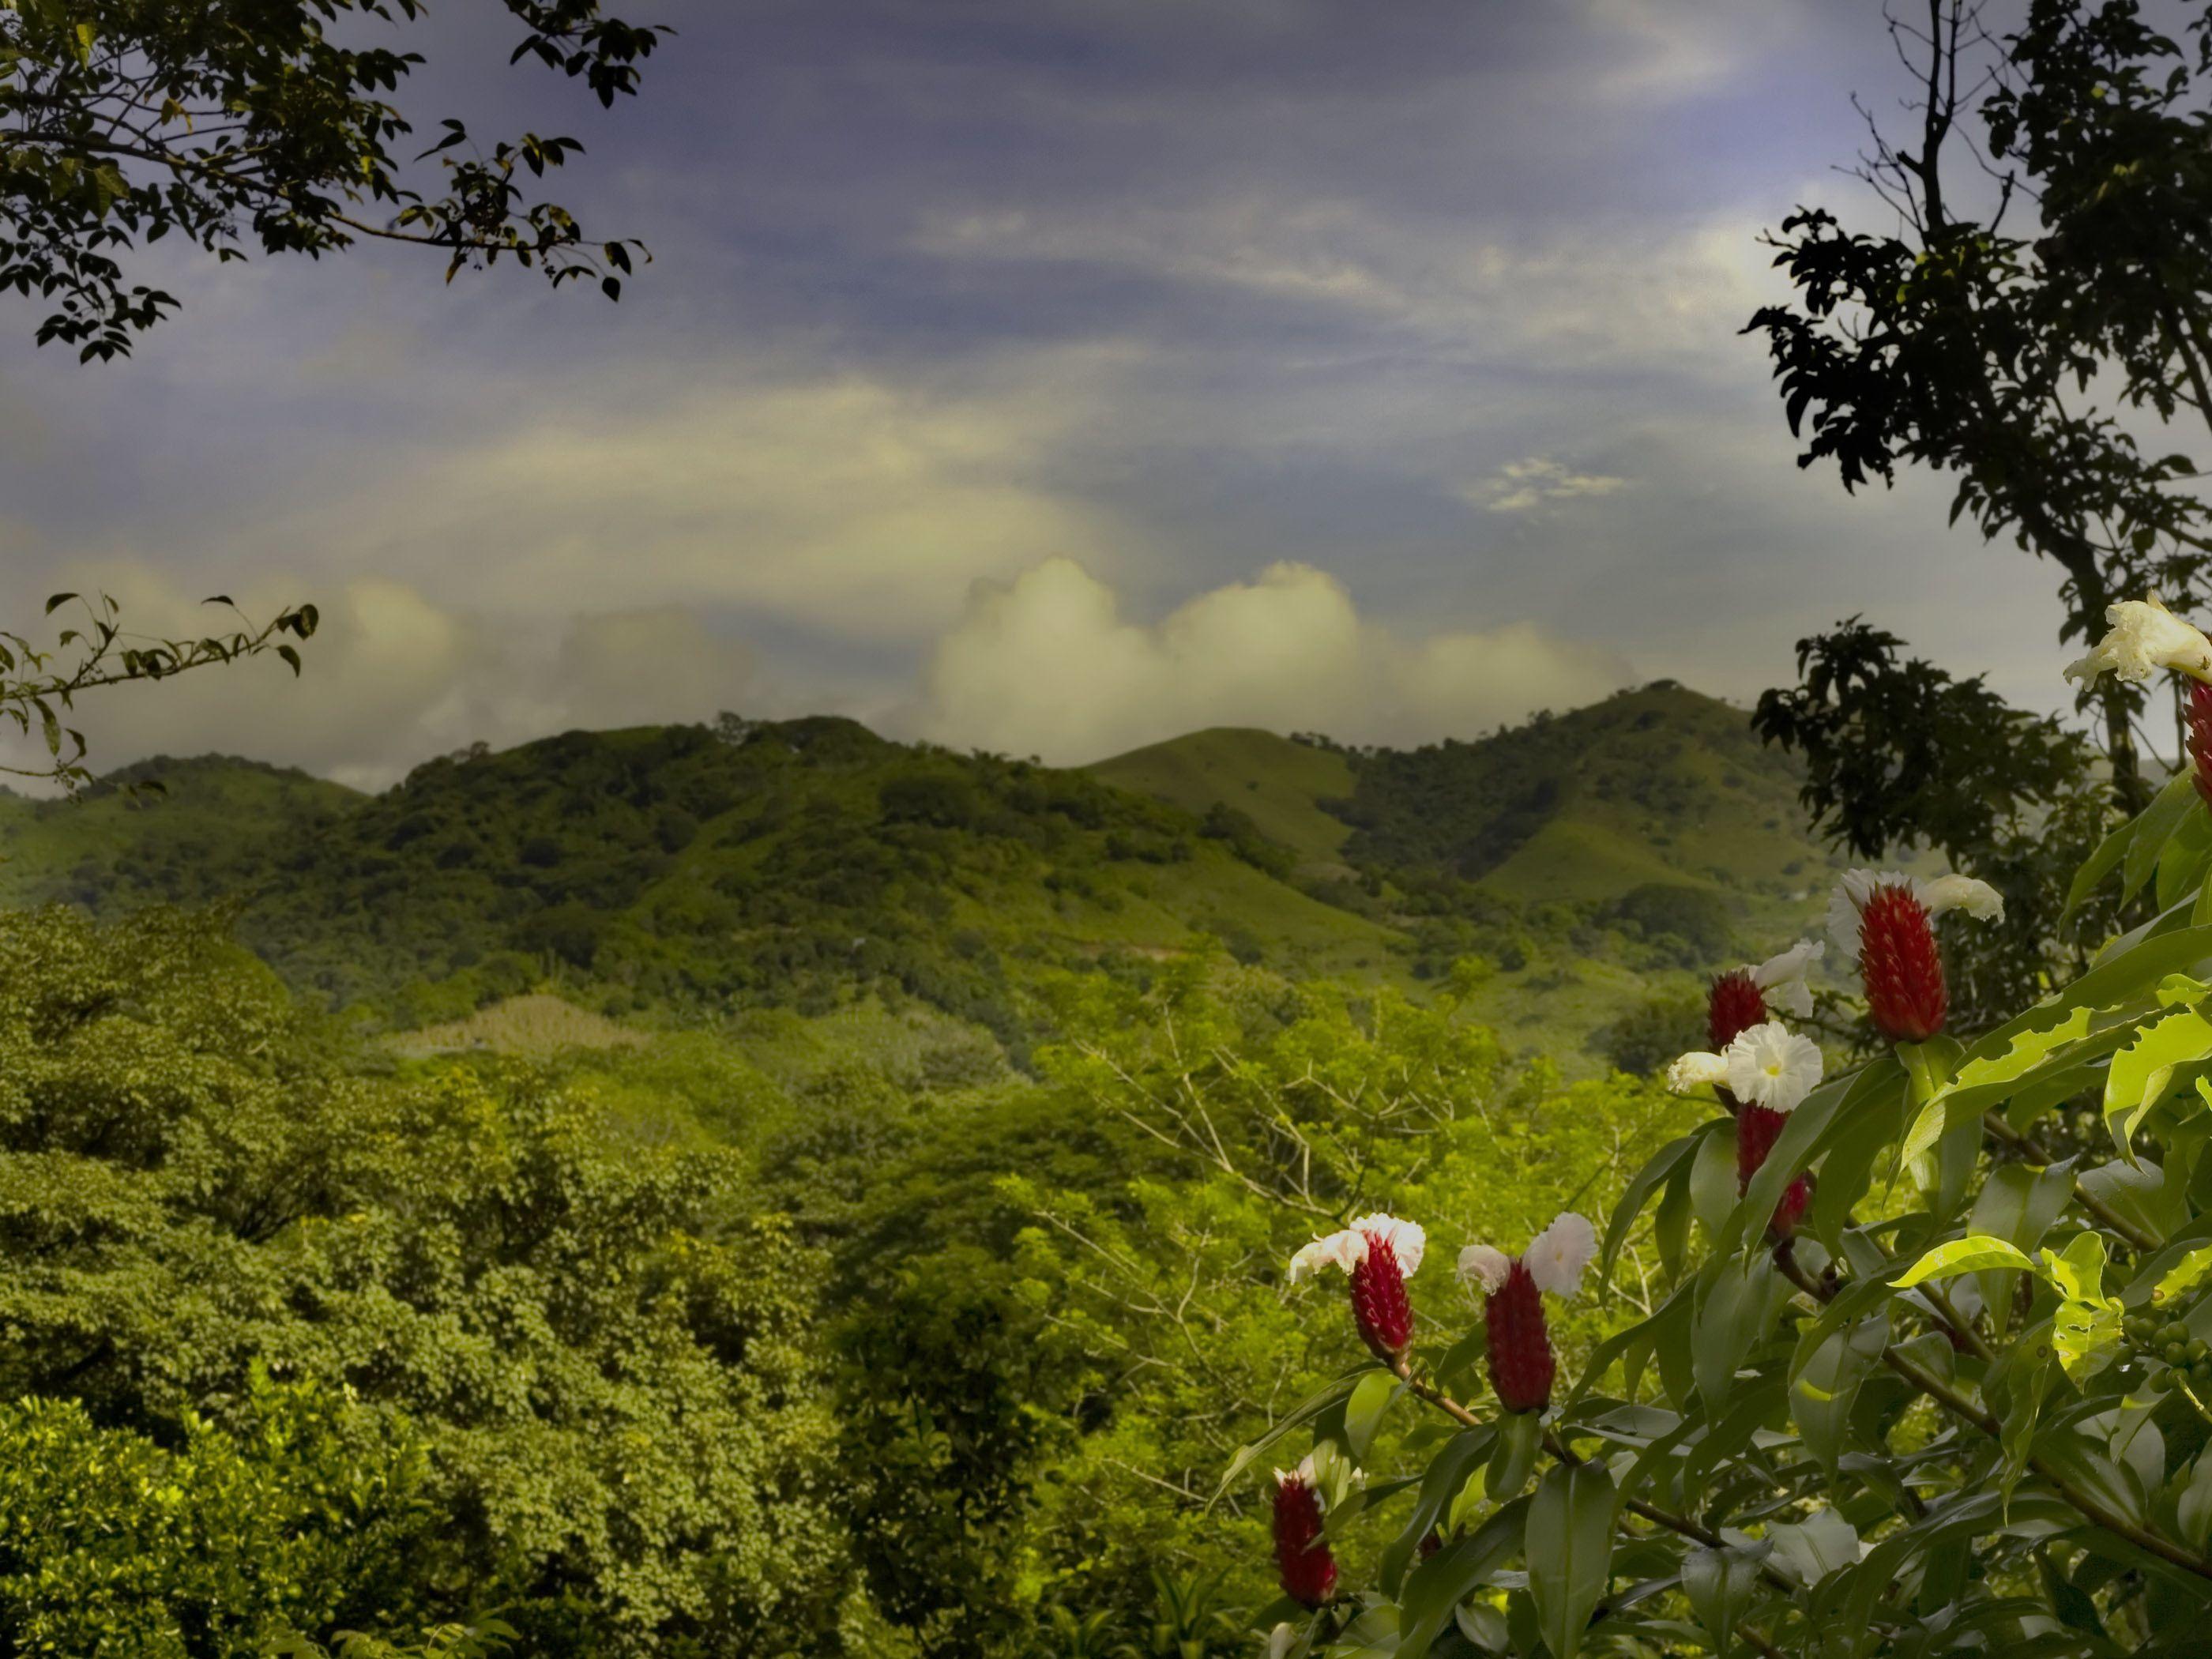 Landscape at Costa rica wallpaper and image